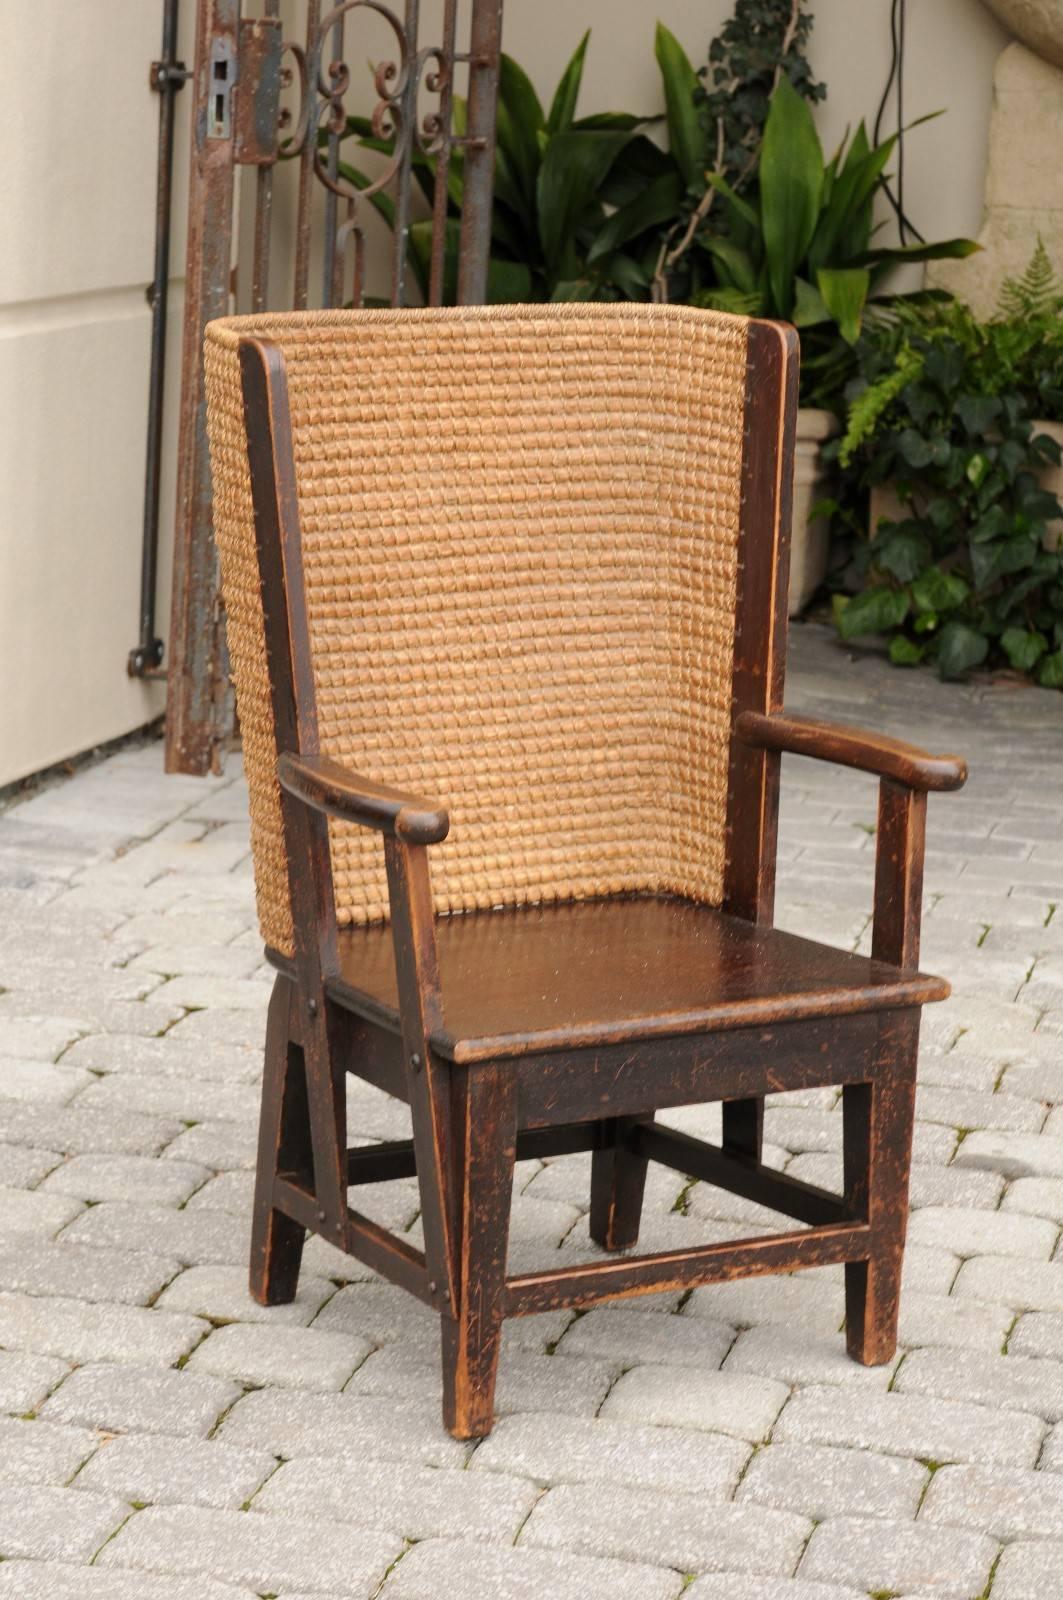 An Orkney accent chair from the mid-19th century. This wood and straw chair, circa 1860 comes from the Orkney Islands near the northern tip of Scotland. Produced in the 1800s-early 1900s, these stylistically very recognizable chairs feature a wooden